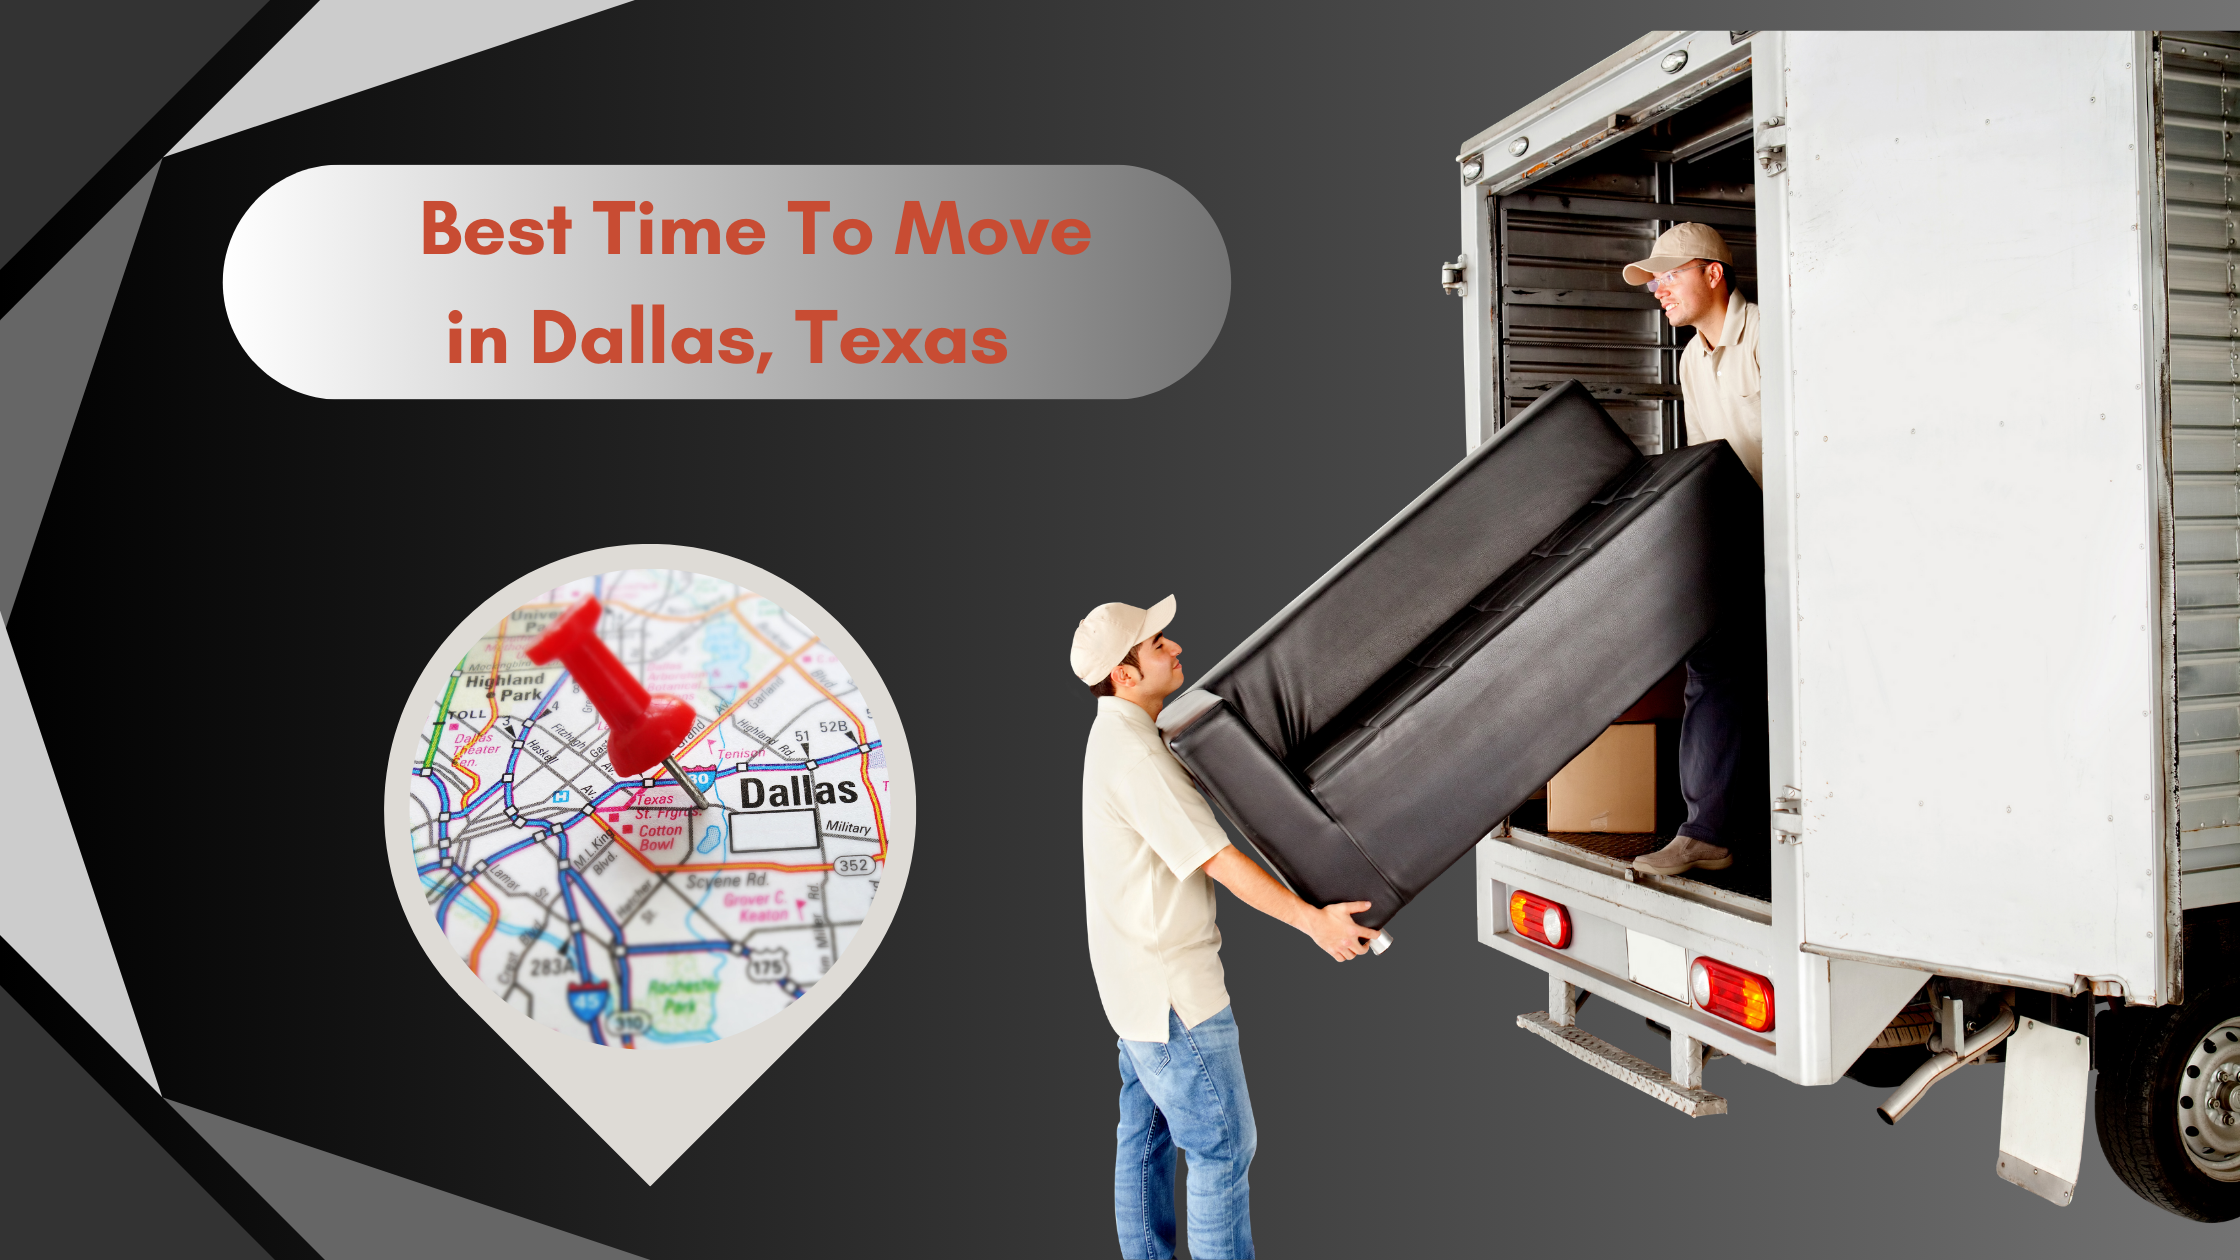 What is the Best Time To Move in Dallas, Texas